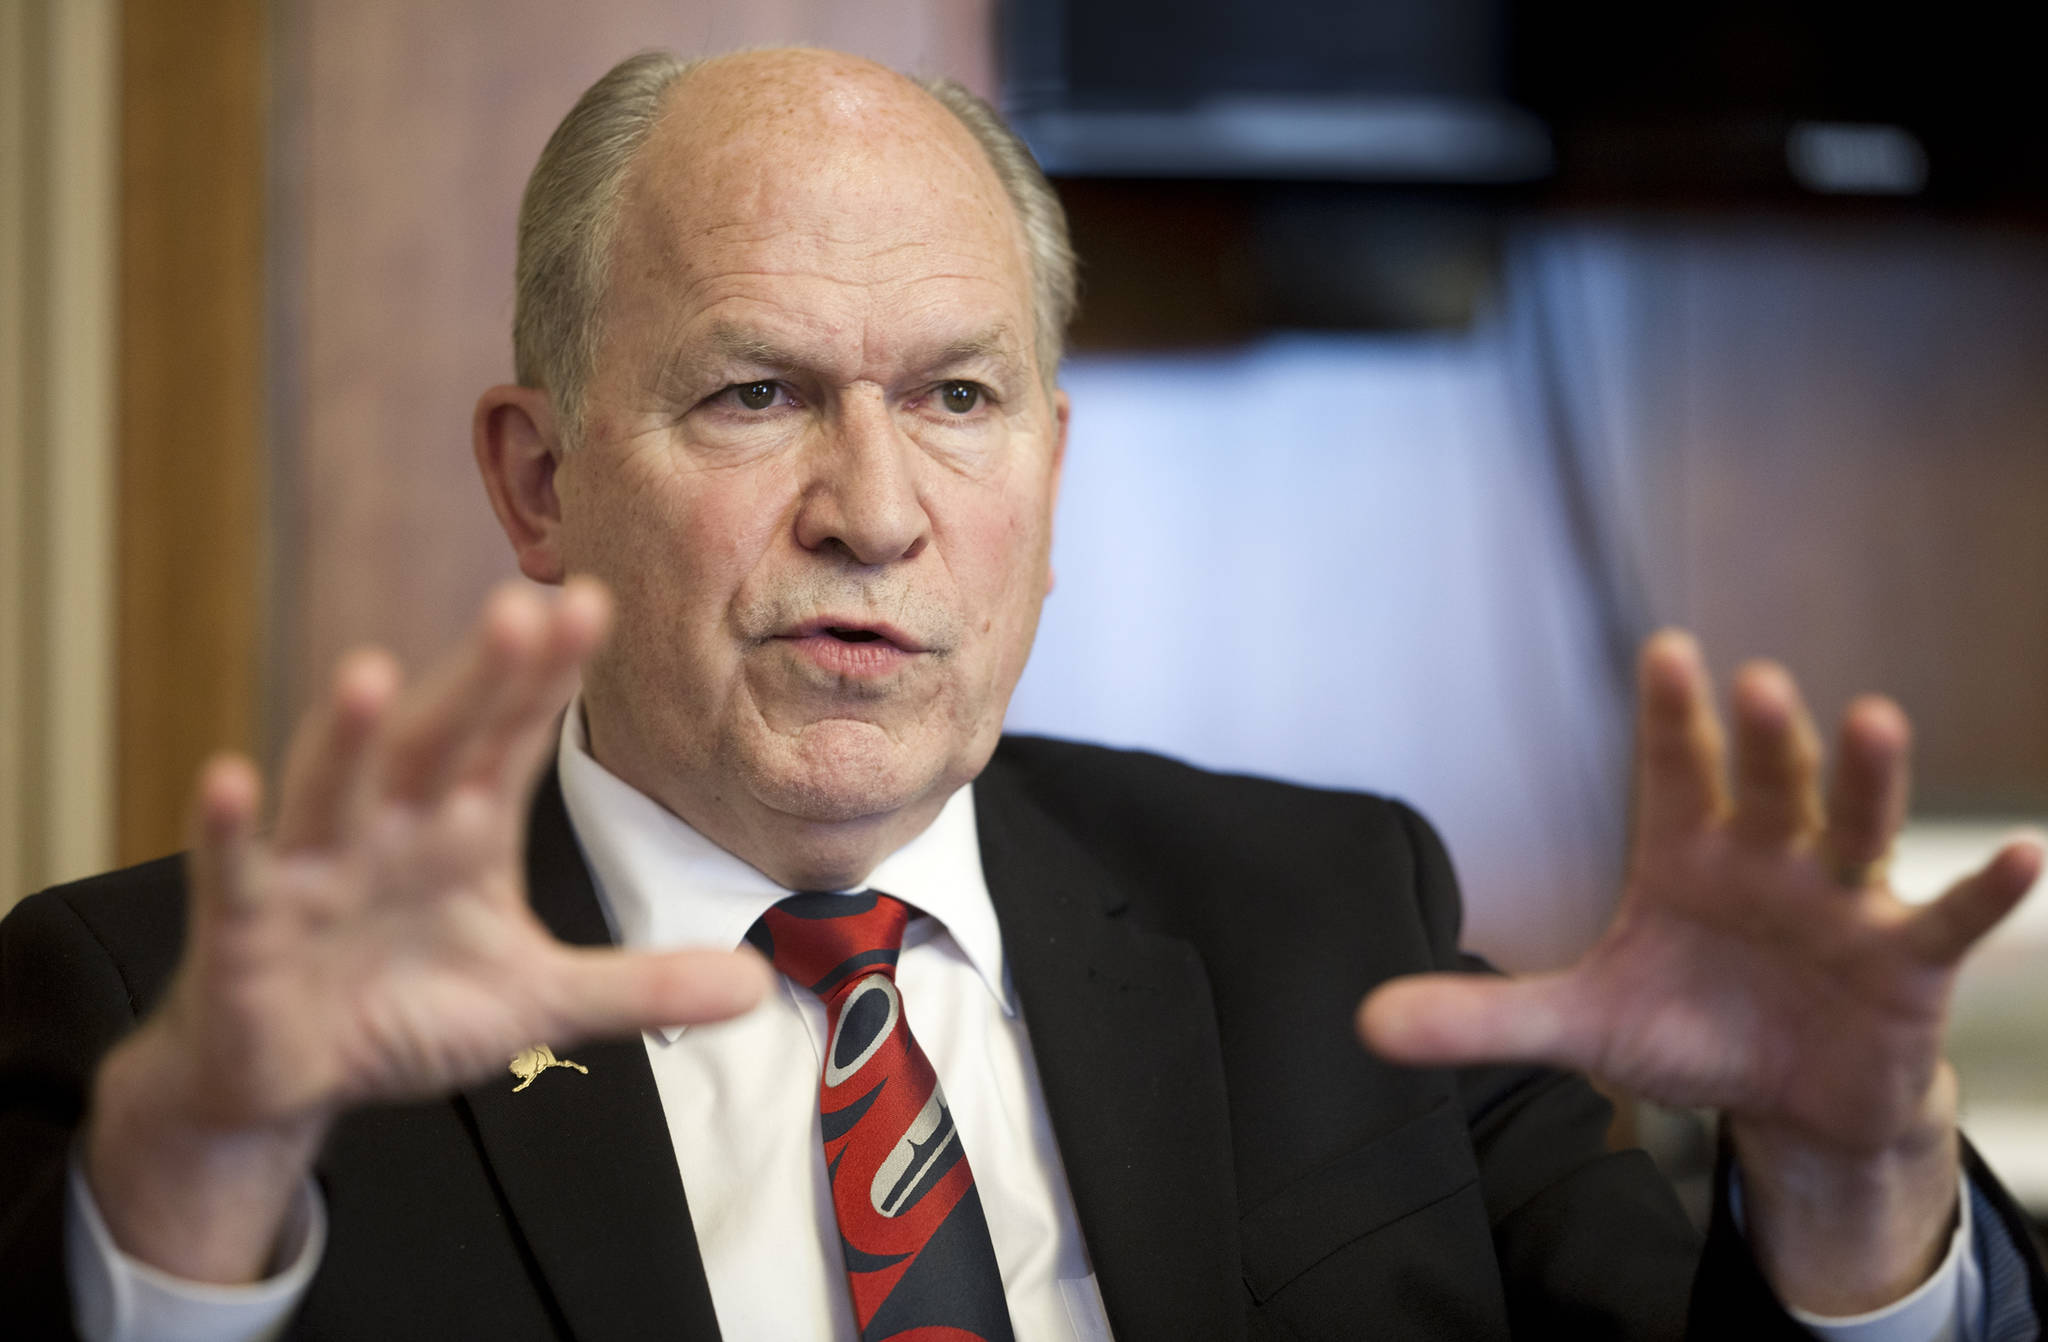 Gov. Bill Walker speaks during a 2014 interview in the Capitol. Walker signed the state’s $1.4 billion capital construction budget on Thursday. (Michael Penn | Juneau Empire File)